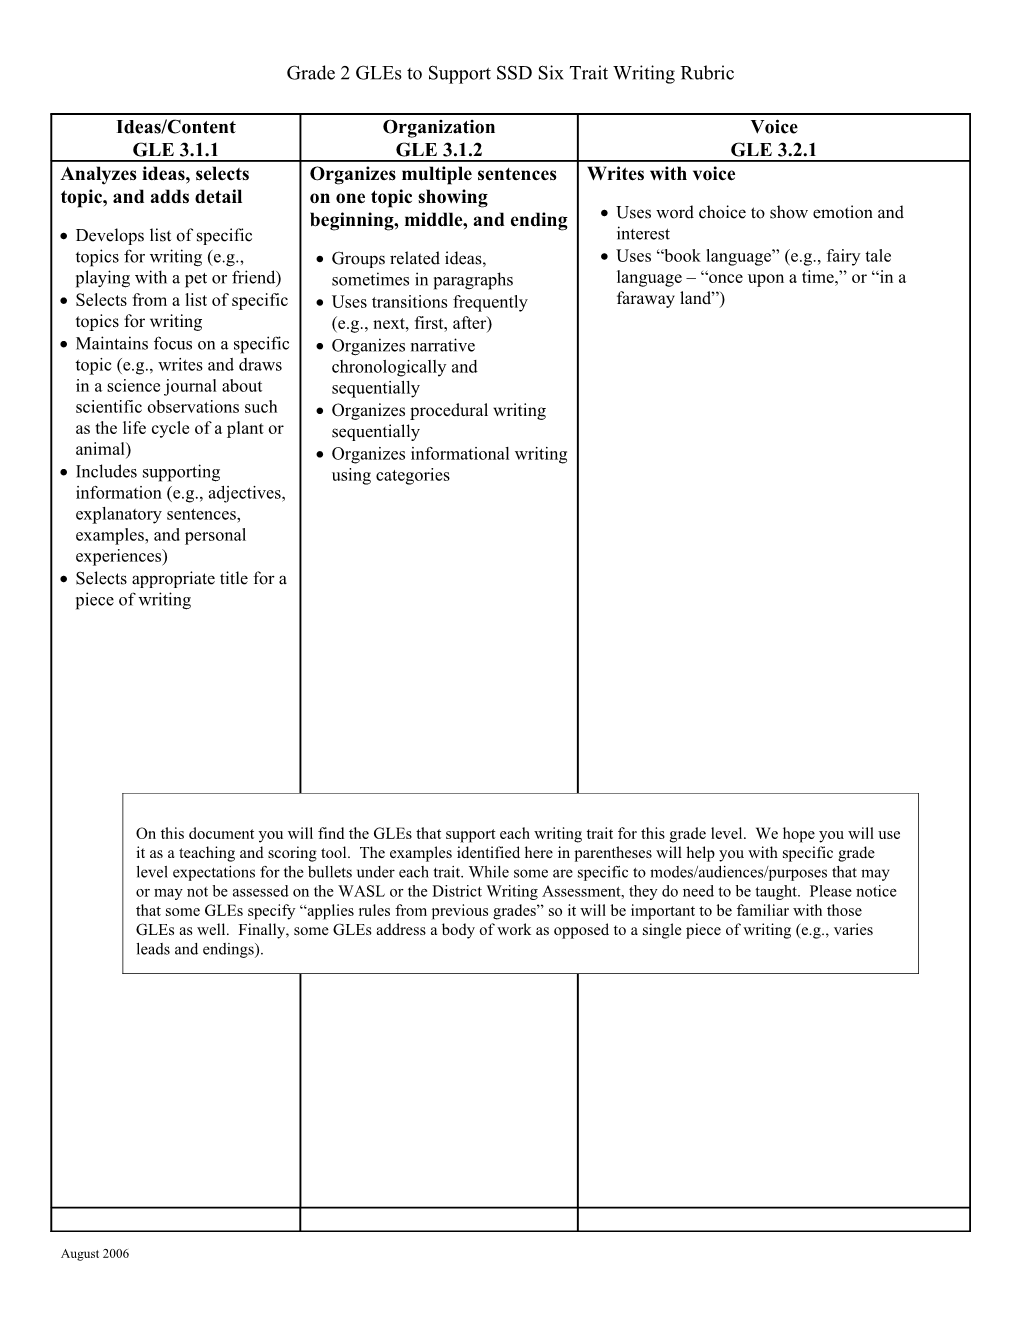 Grade 2 Gles to Support SSD 6 Trait Writing Rubric